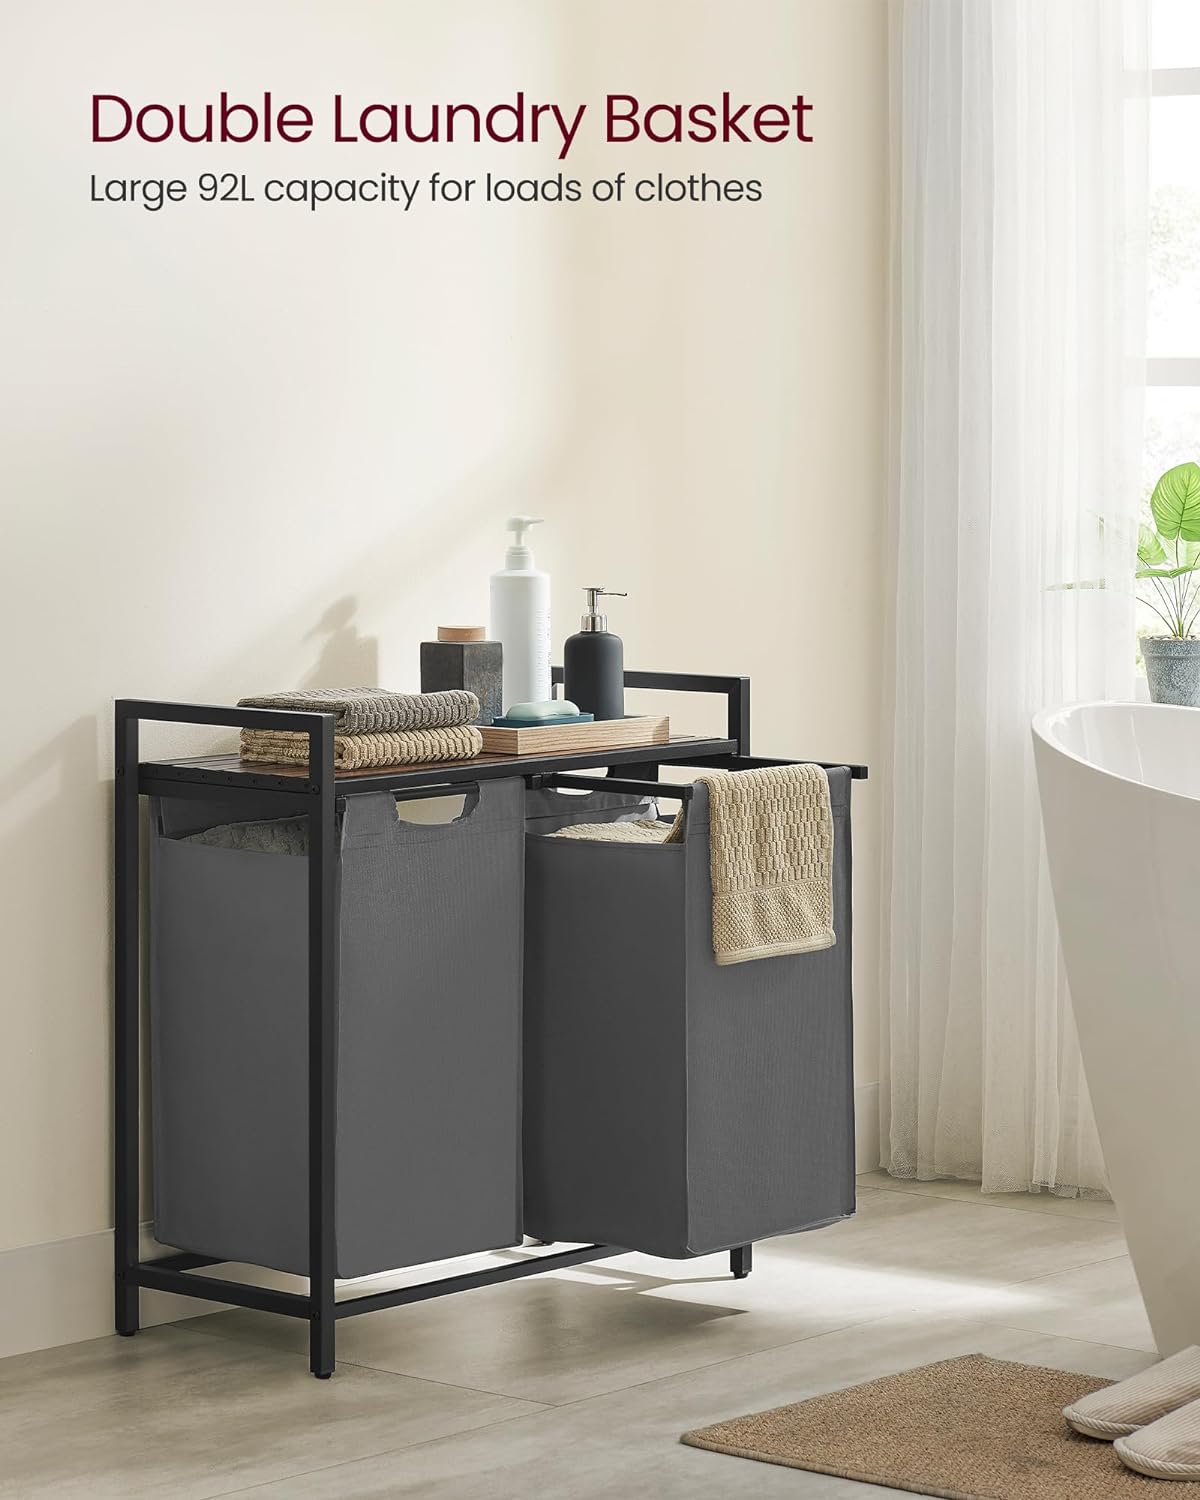 Washing Basket, Laundry Basket, 2 Compartment Laundry Basket, Removable Washing Bags, 2 x 46L, Brown and Grey, VASAGLE, 4